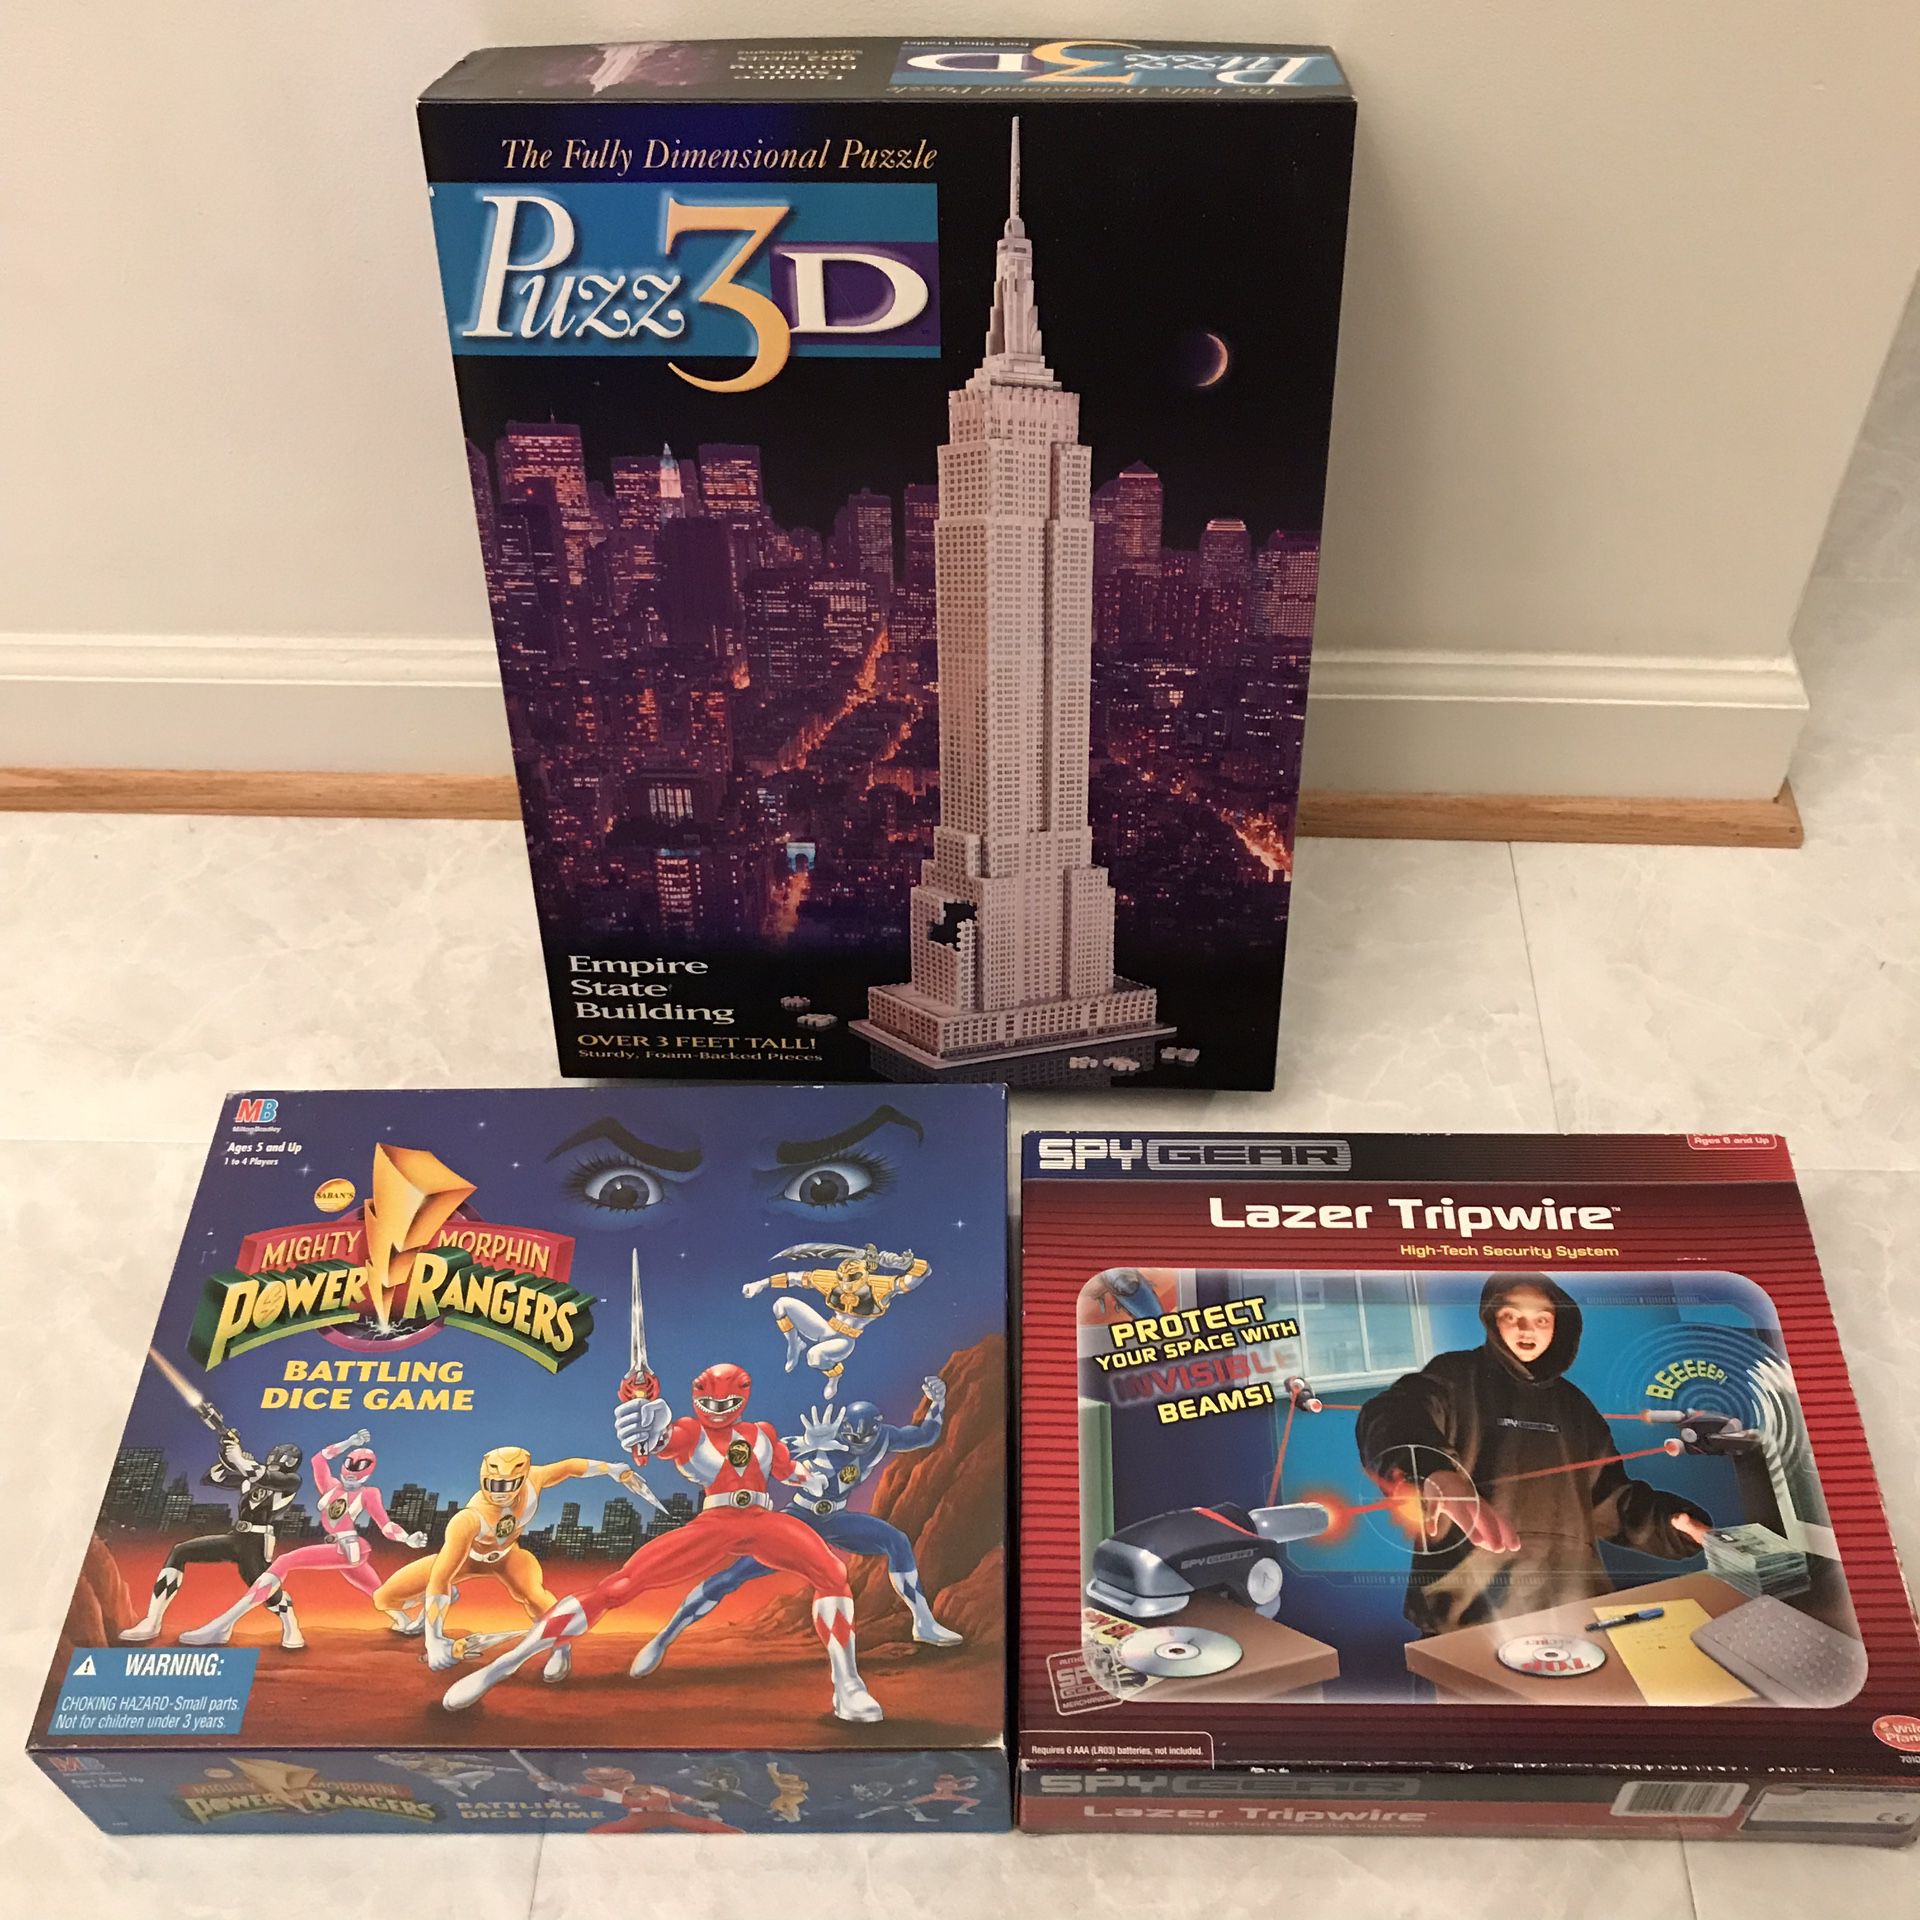 Board games and puzzles toys 3d empire state building spy gear and power rangers toys